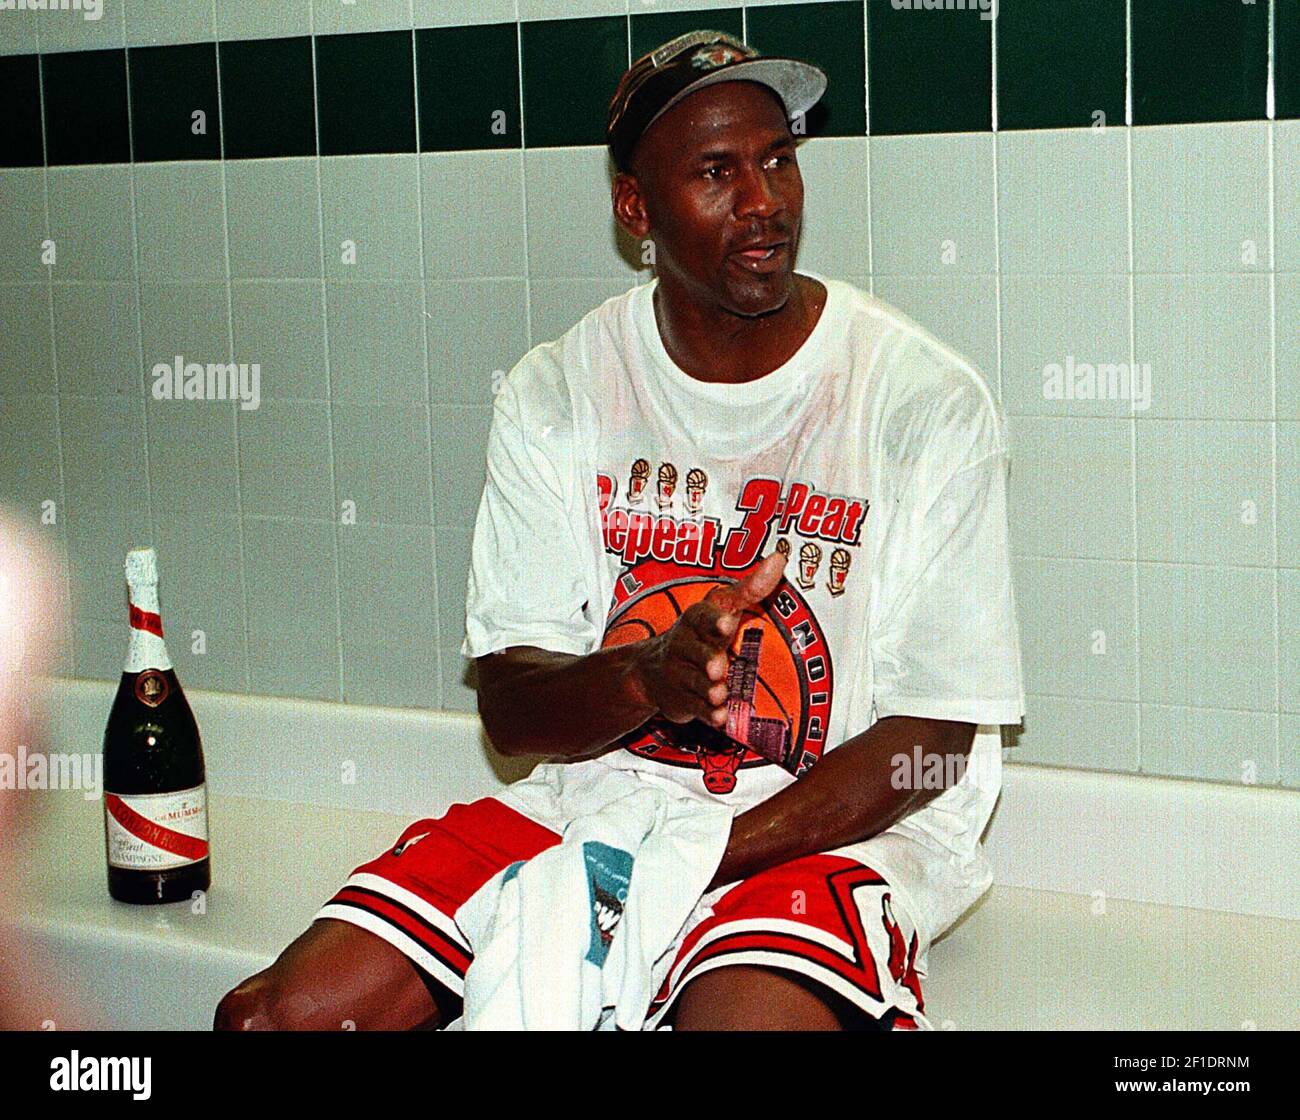 A beverage company's computer honored Michael Jordan before the NBA did 